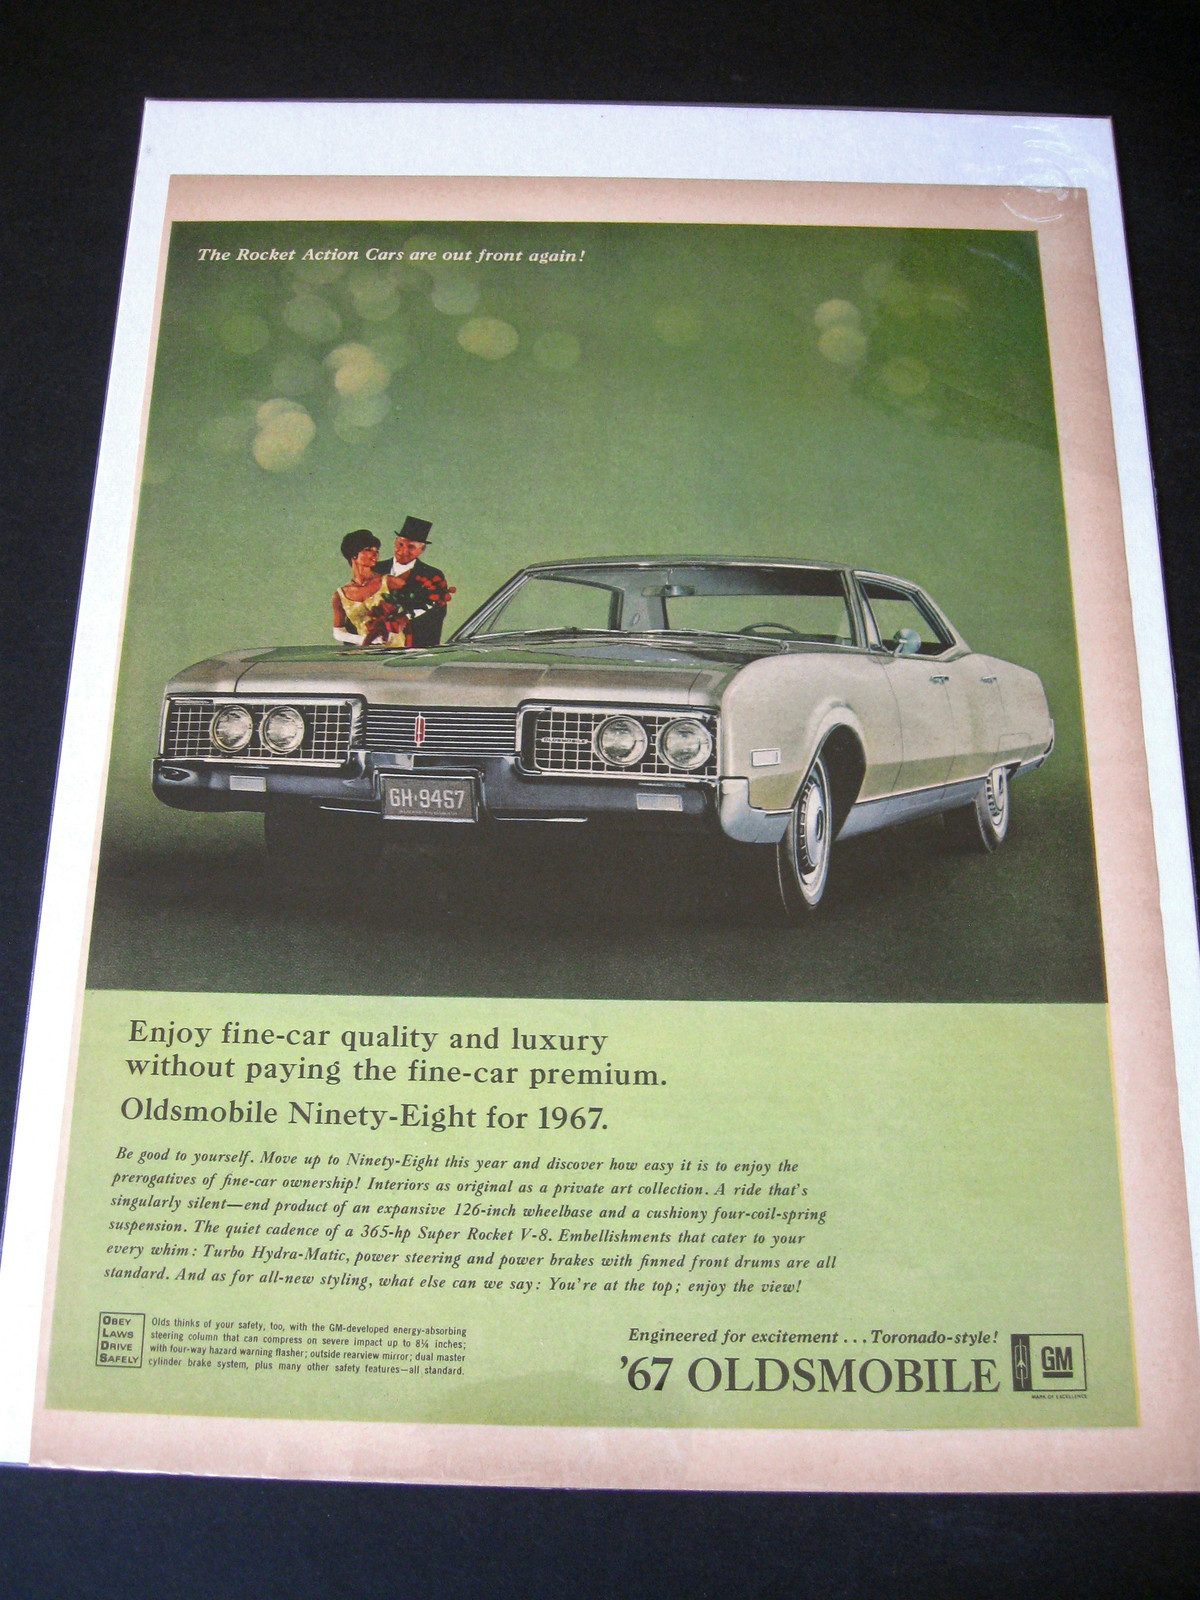 Primary image for Vintage Oldsmobile Ninety-Eight Color Advertisement - 1967 Oldsmobile Ad